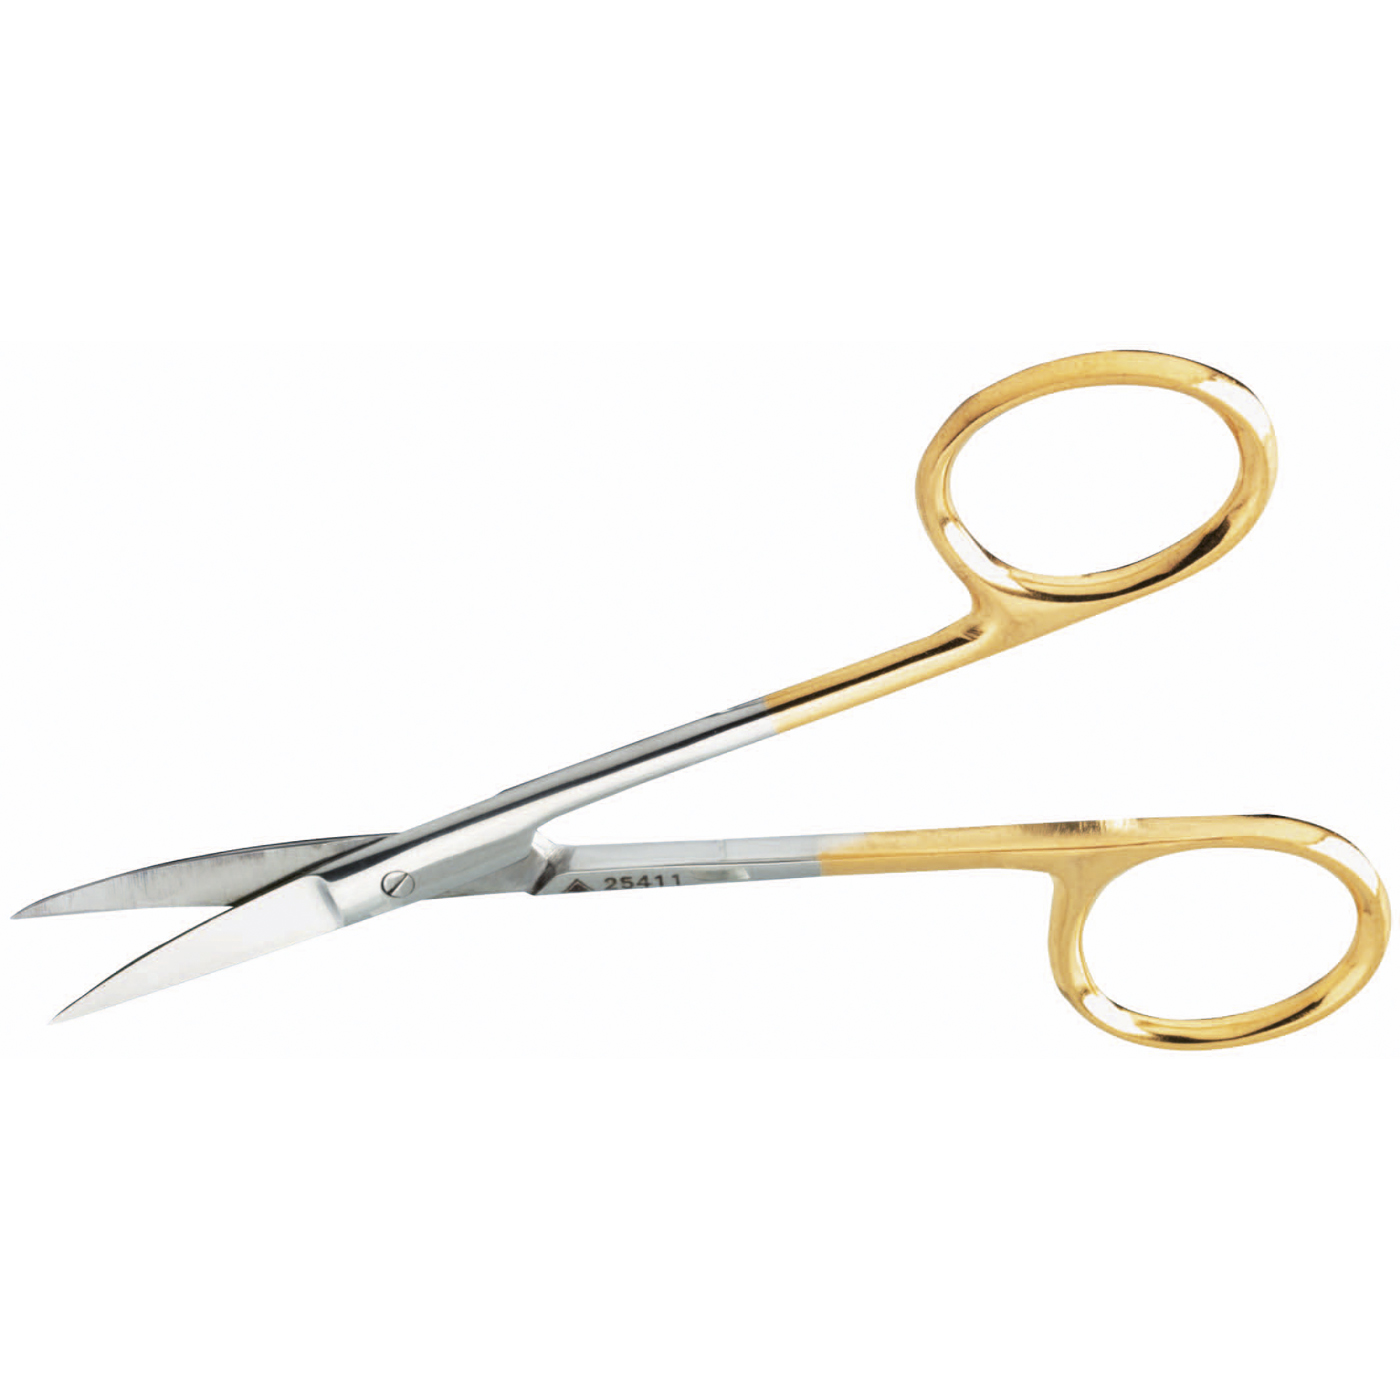 FINO Foil Scissors, Curved, with Gold-Coloured Handle,110 mm - 1 piece